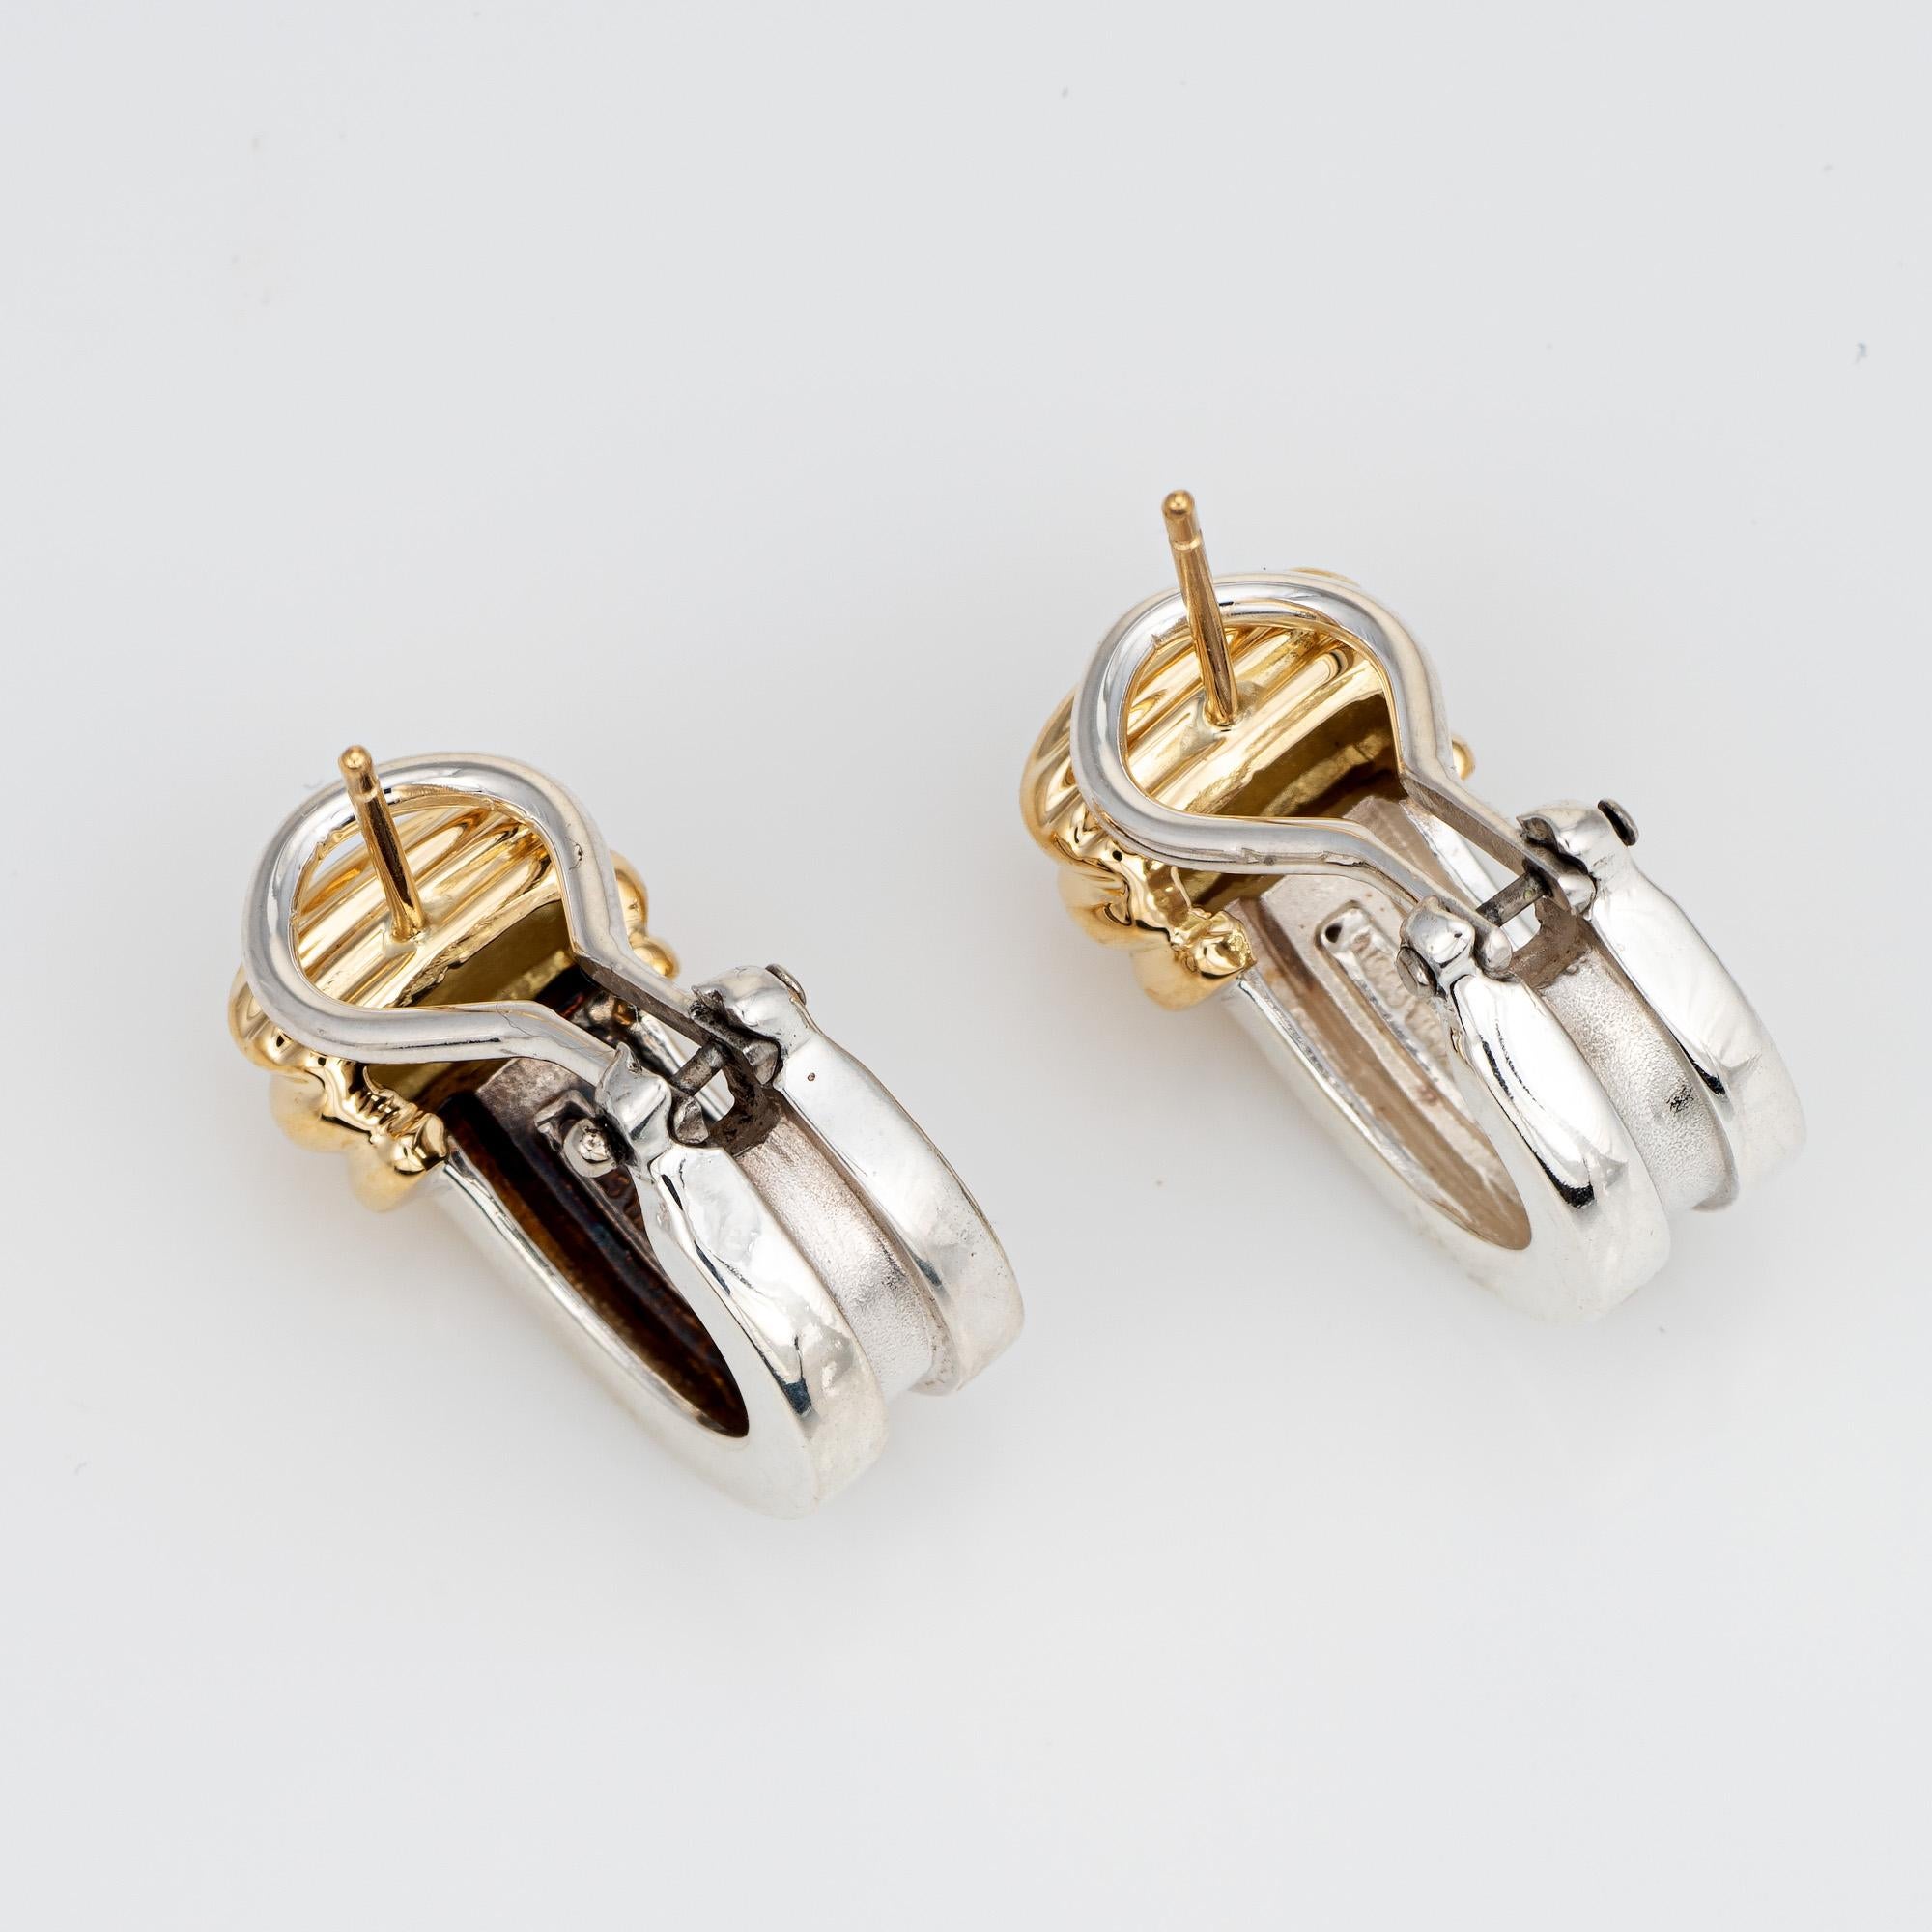 Finely detailed pair of vintage Tiffany & Co Atlas earrings (circa 1995) crafted in sterling silver & 18k yellow gold. 

From the popular Atlas collection, the stylish earrings are crafted in sterling silver with 18k yellow gold accents. The retired